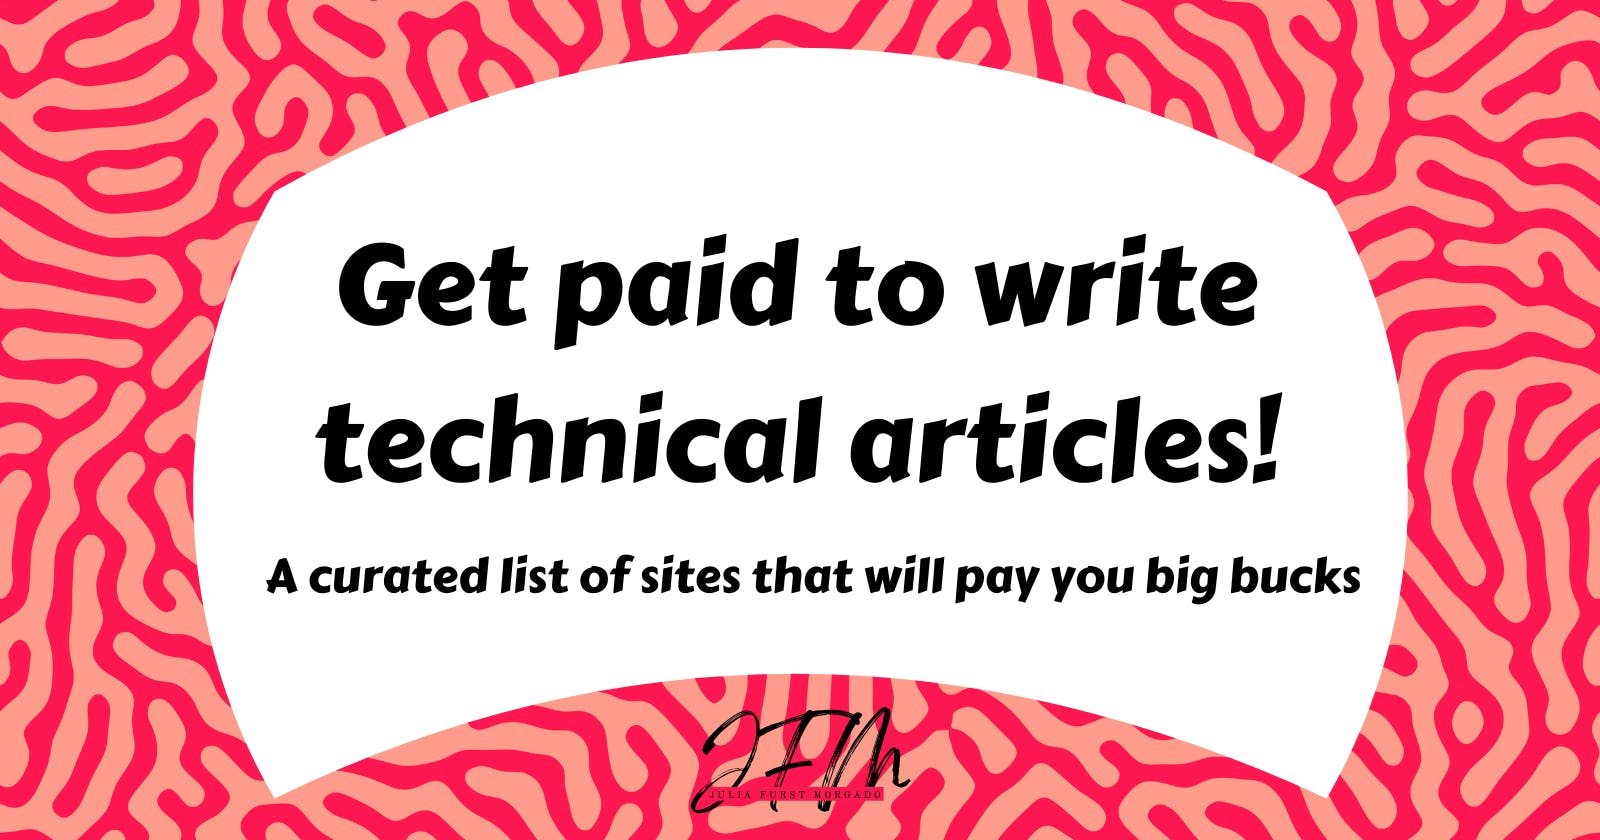 Get paid to write technical articles